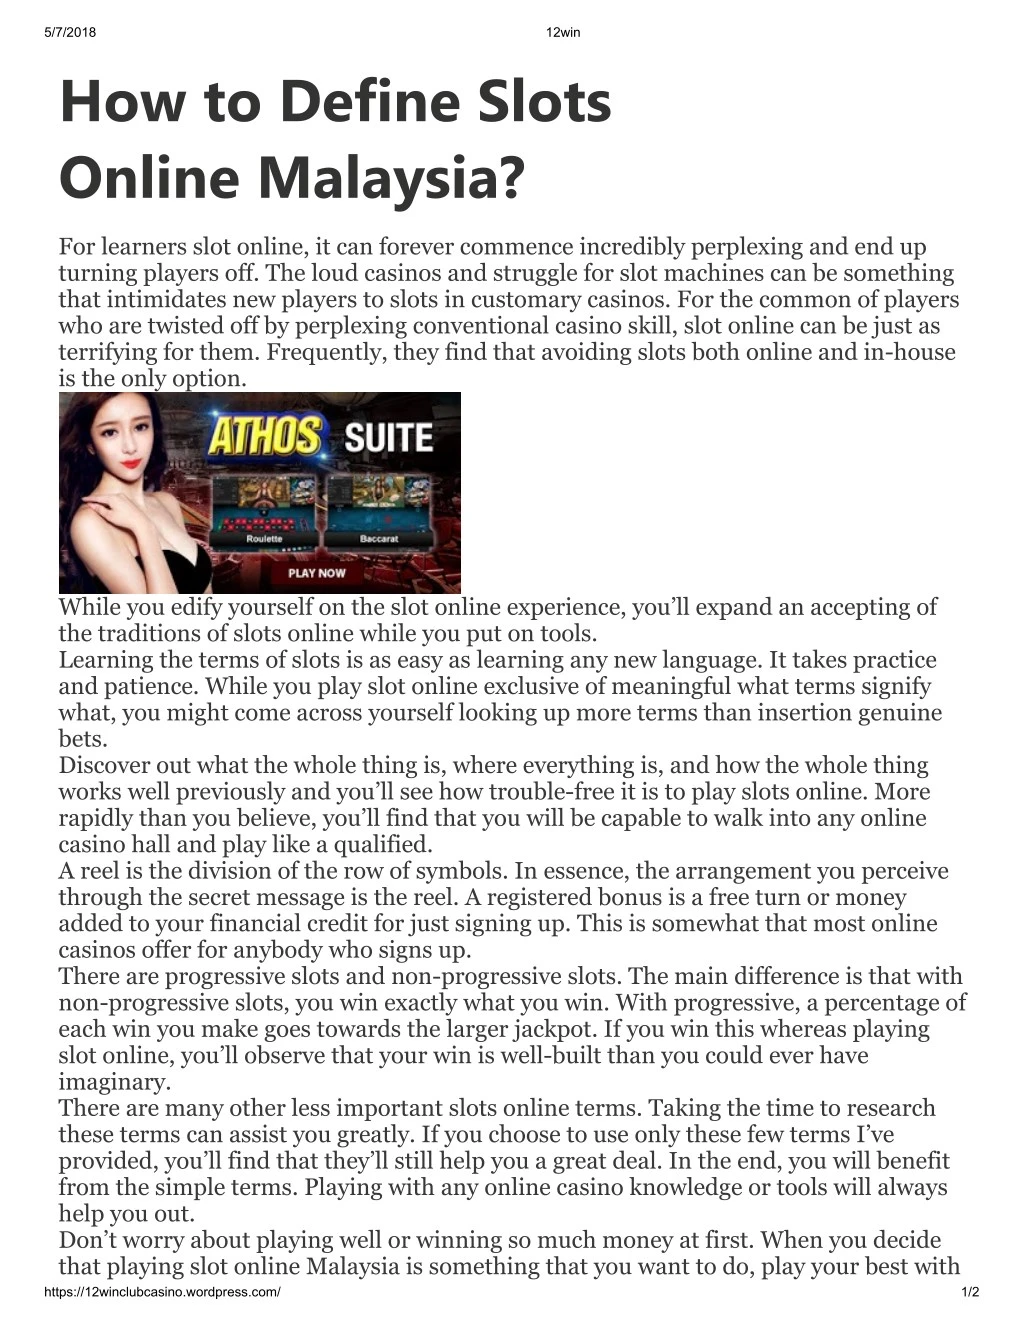 5 7 2018 how to define slots online malaysia